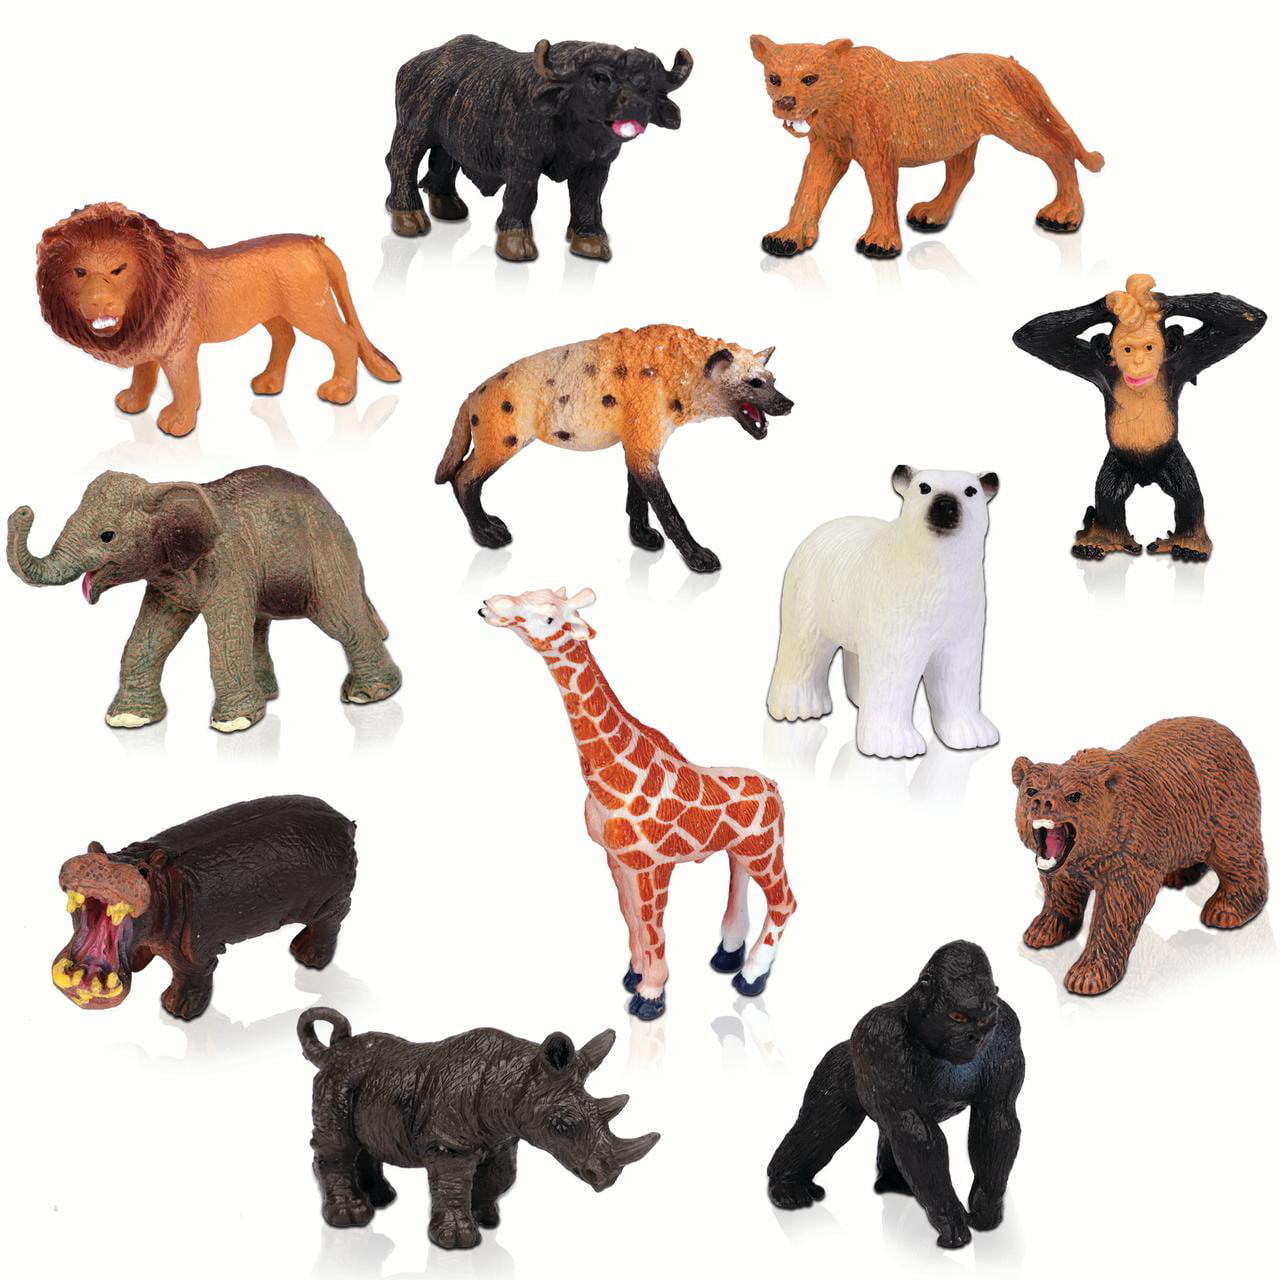 Animal Figures, Jungle Animal Toy Set 12 Pieces, playkidiz toys Realistic  Wild Vinyl Animals for Kids, Toddler, Child, Plastic Animal Party Favors  Learning Forest Farm Animal Toys Playset. 